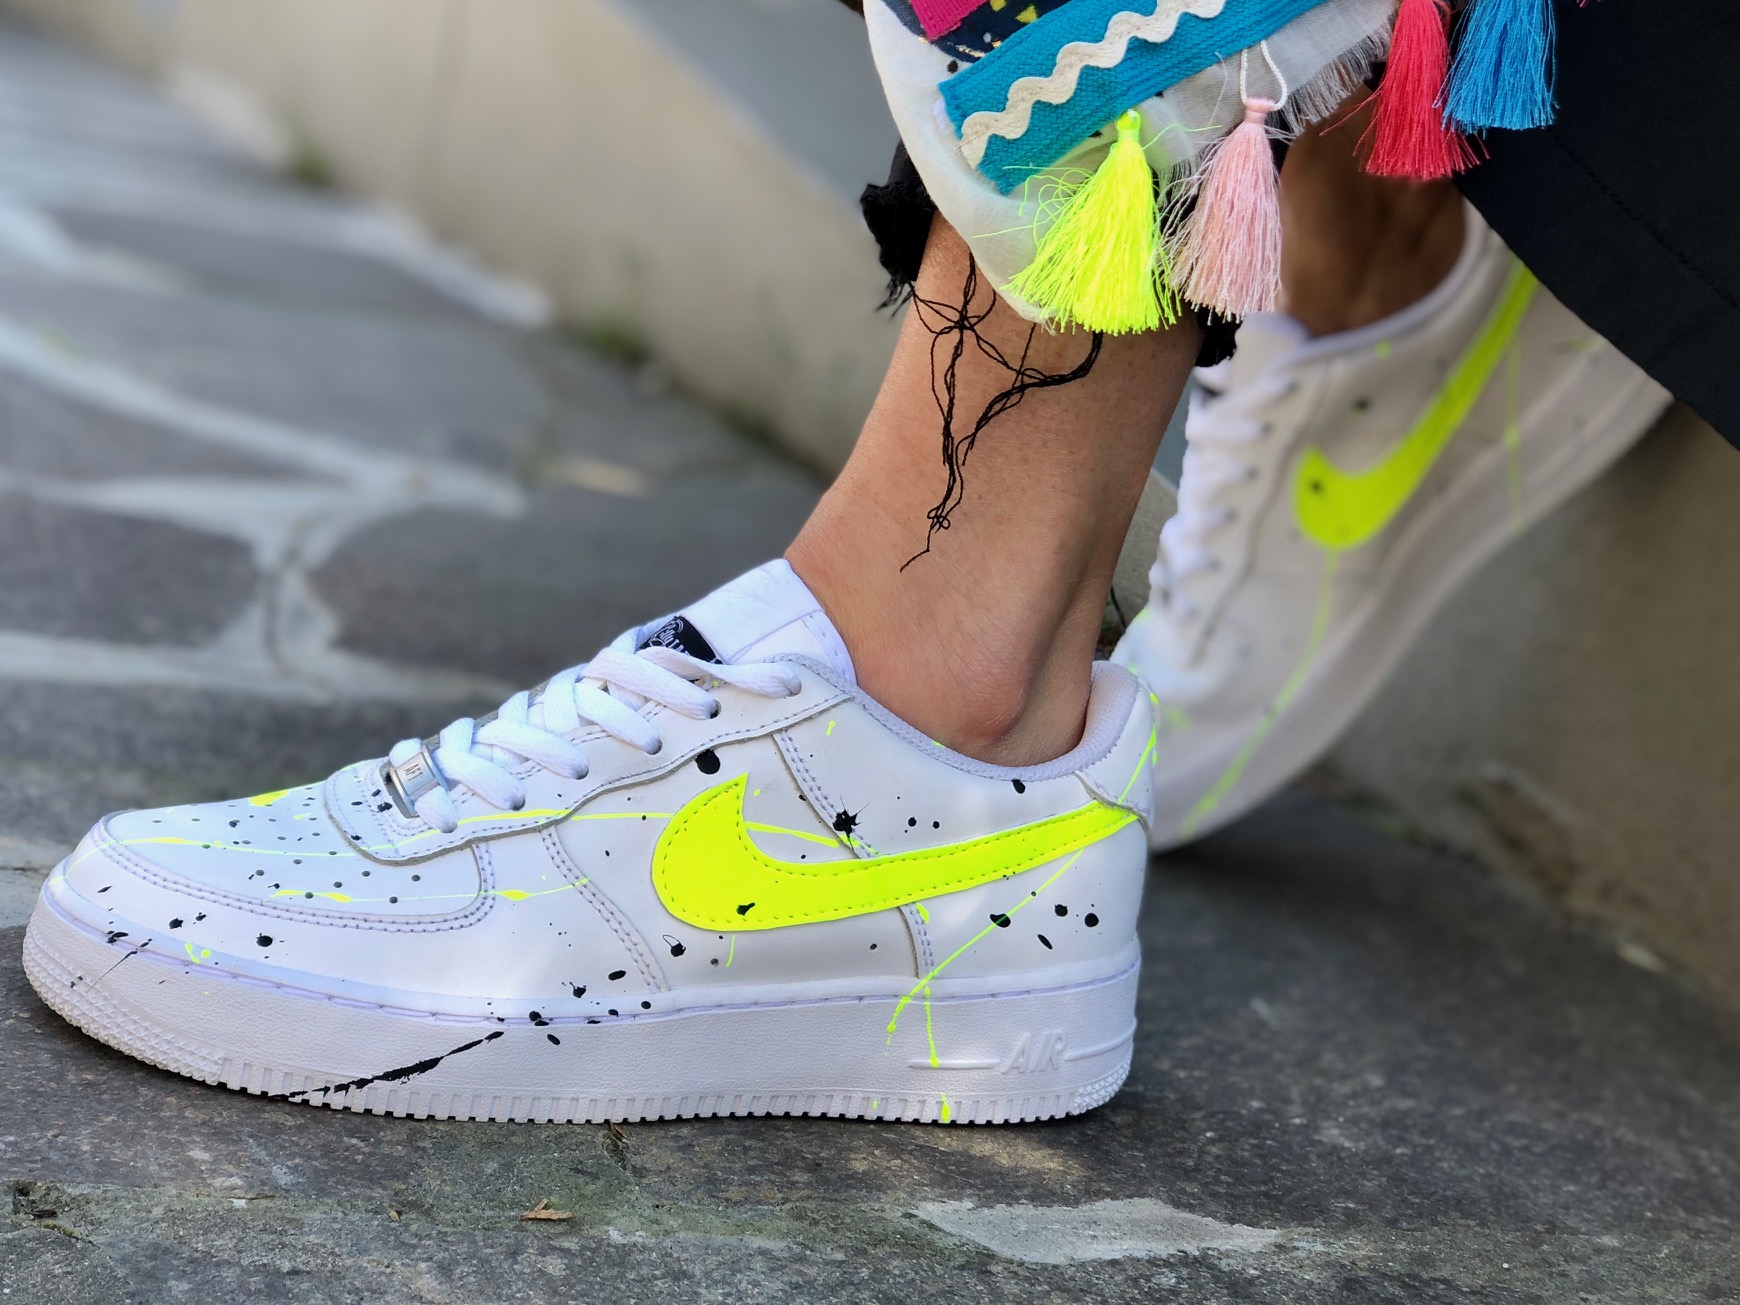 air force 1 uomo gialle fluo